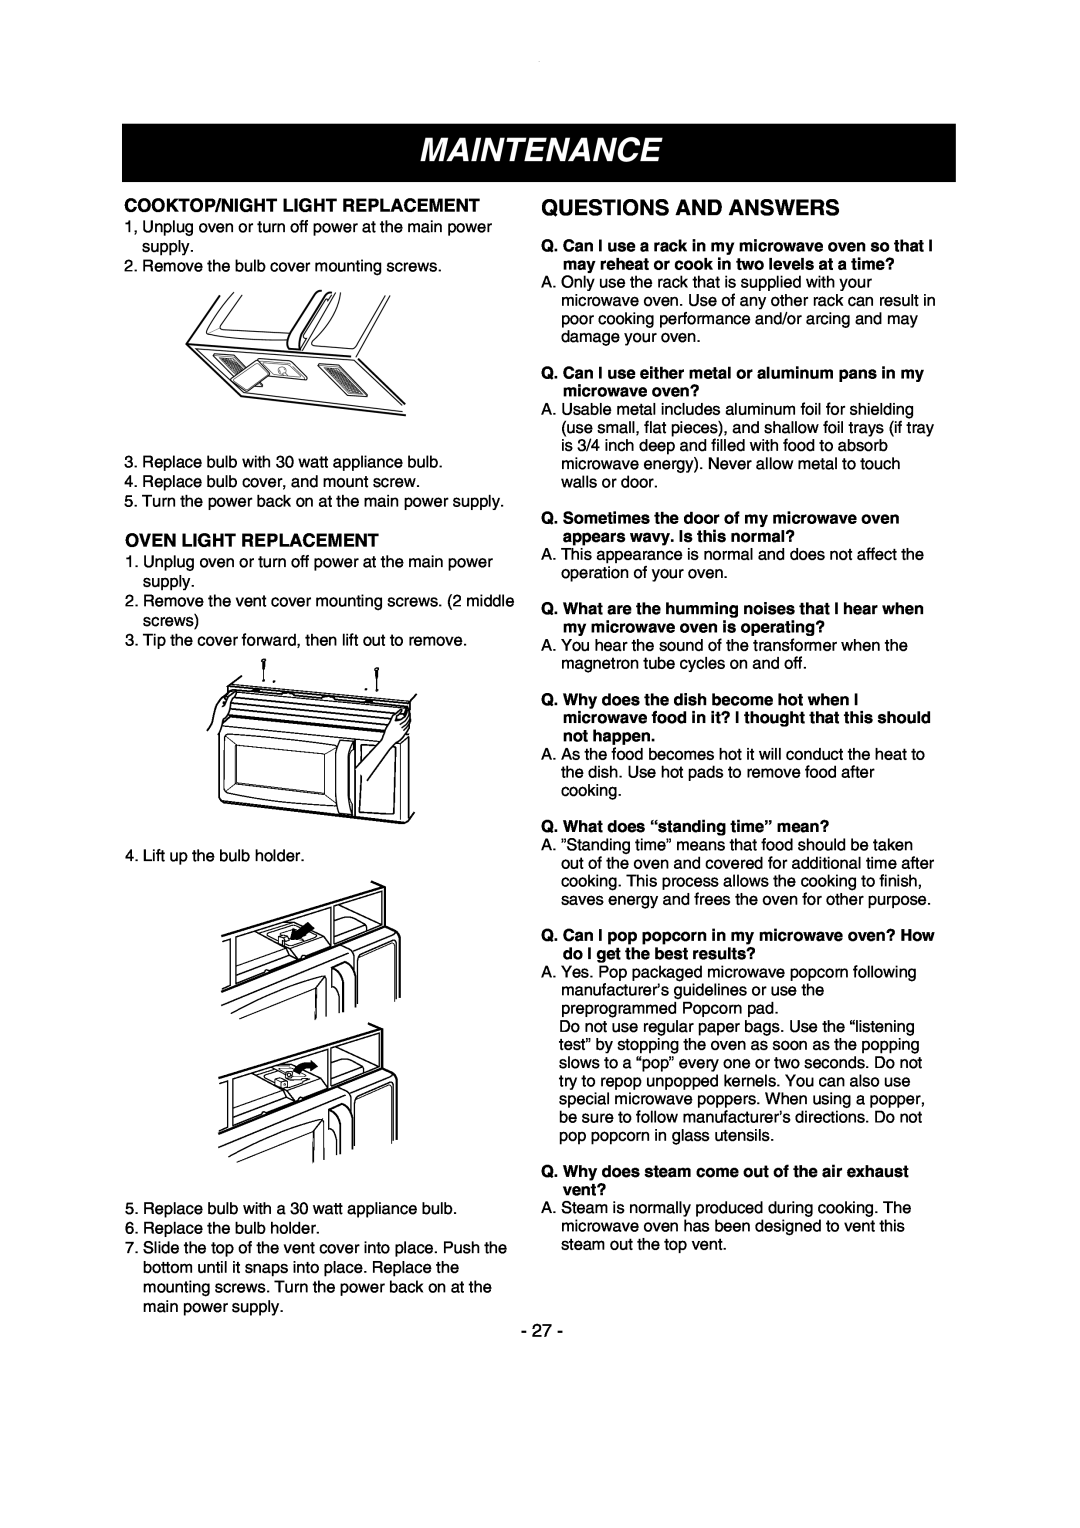 LG Electronics MV1615B Questions And Answers, Maintenance, Cooktop/Night Light Replacement, Oven Light Replacement 